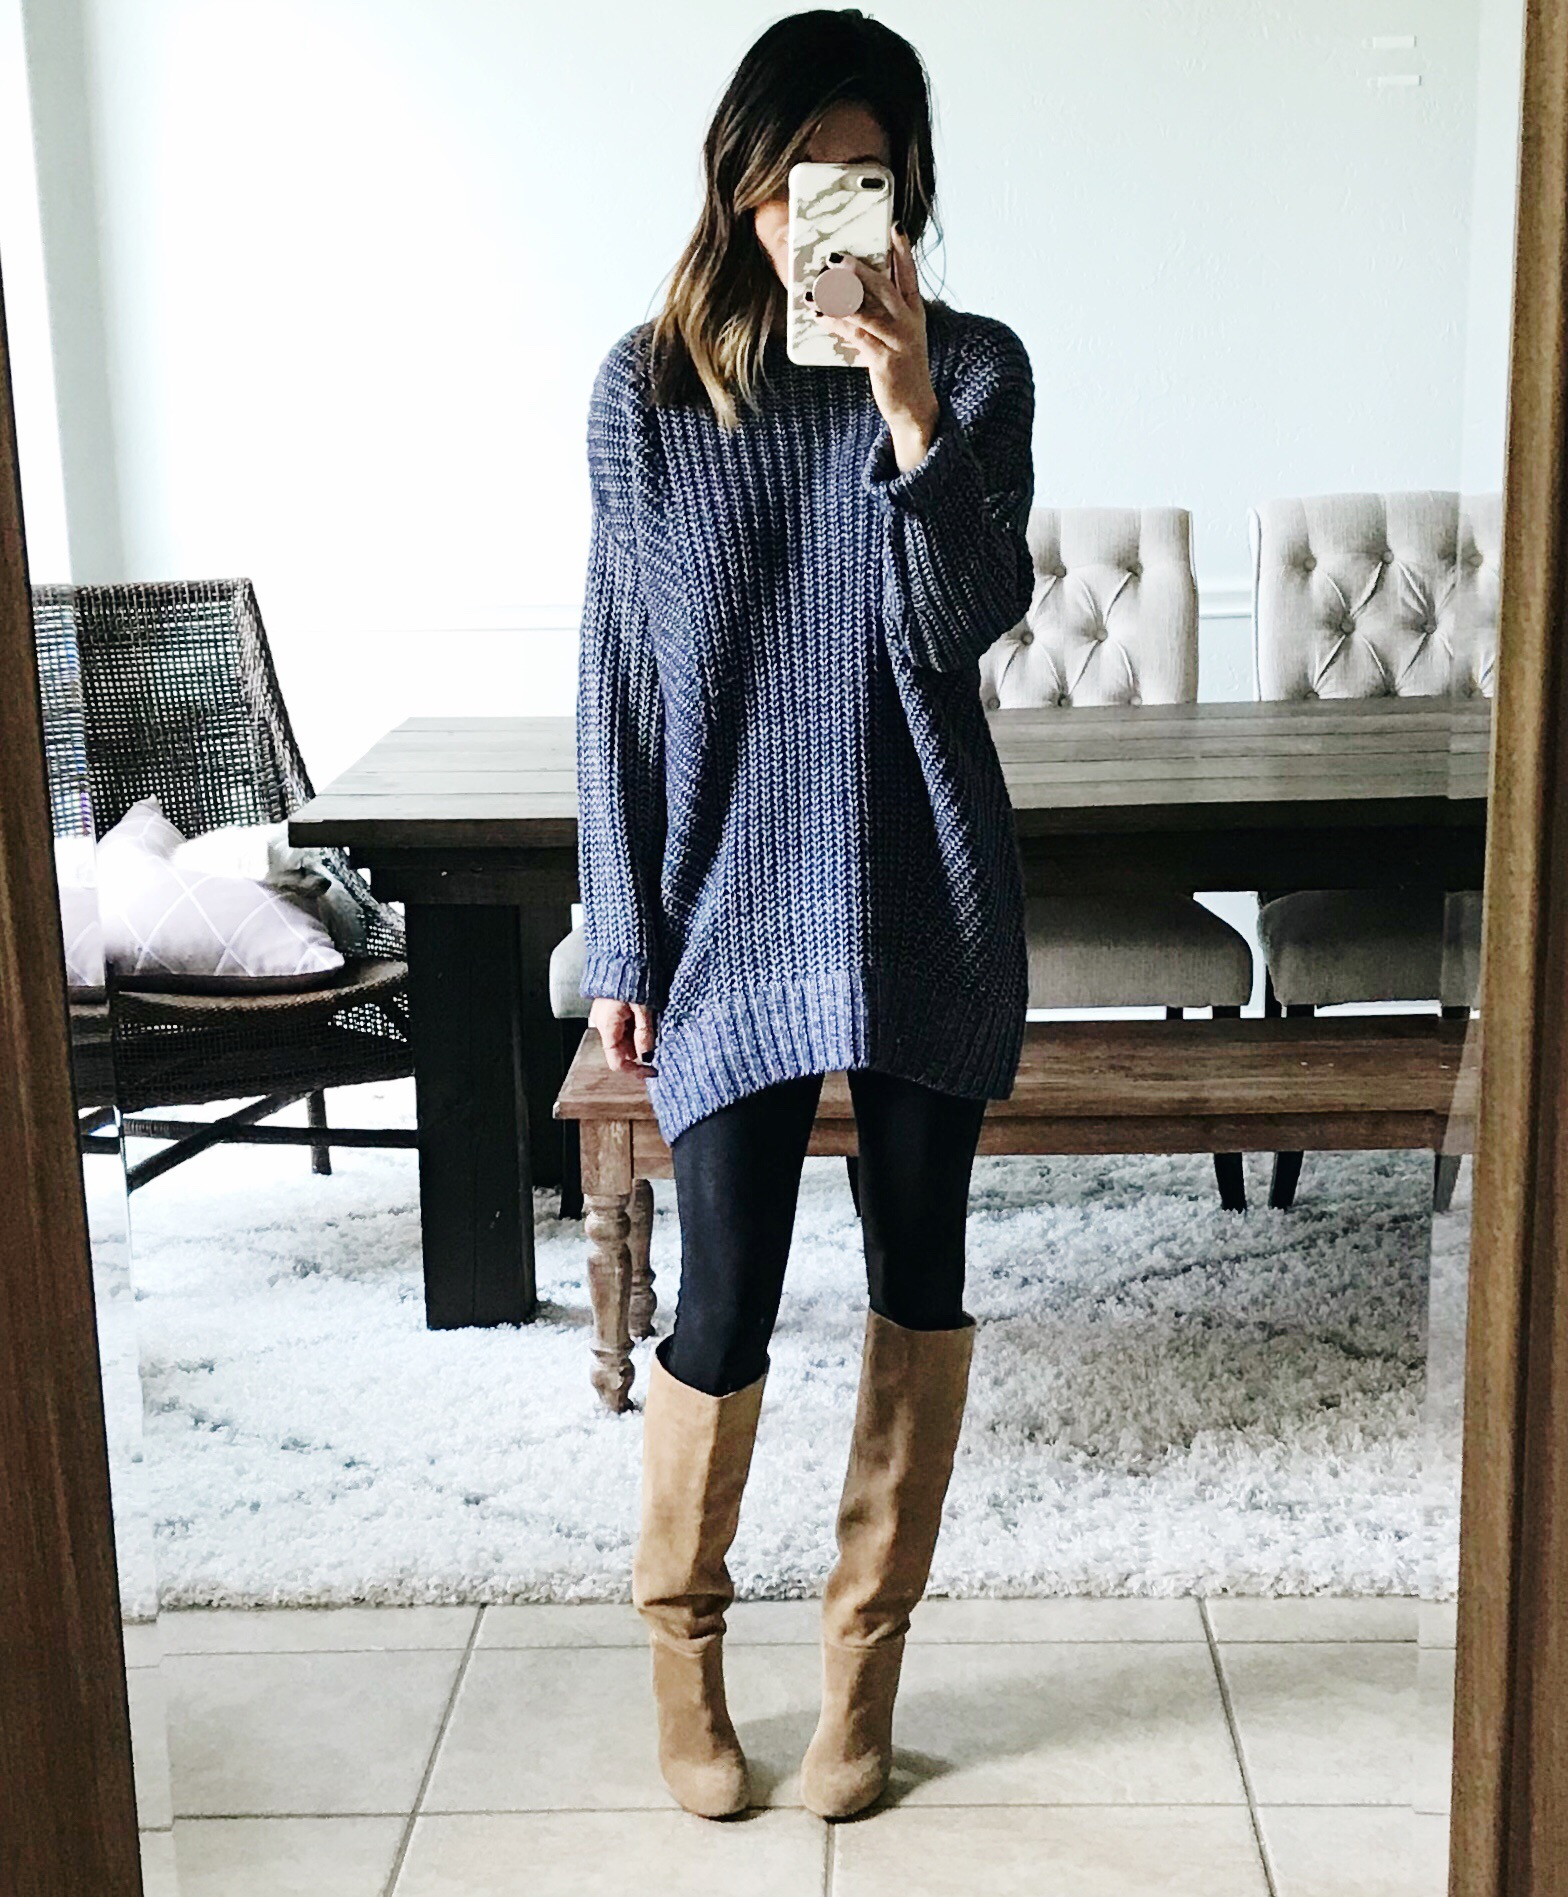 Can You Wear Cowboy Boots With Leggings? – solowomen